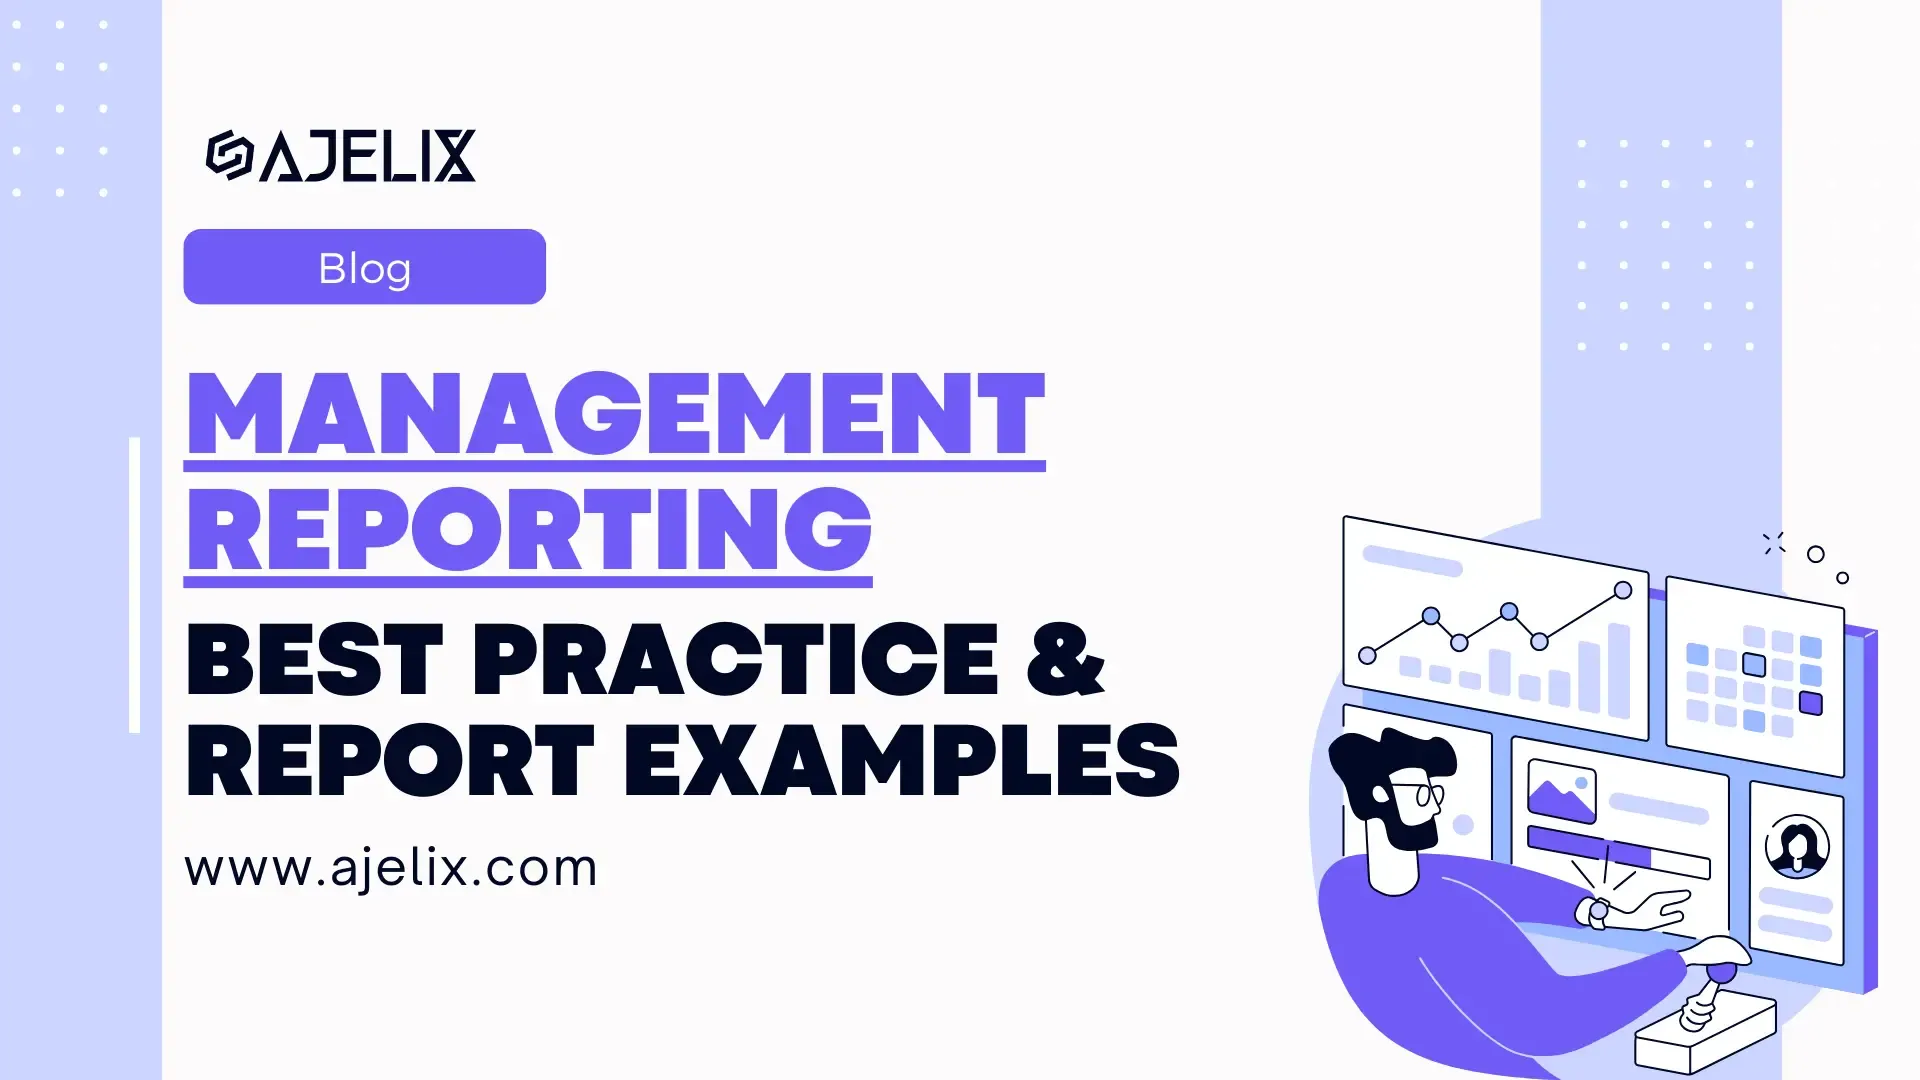 Management reporting best practices with report examples banner by ajelix